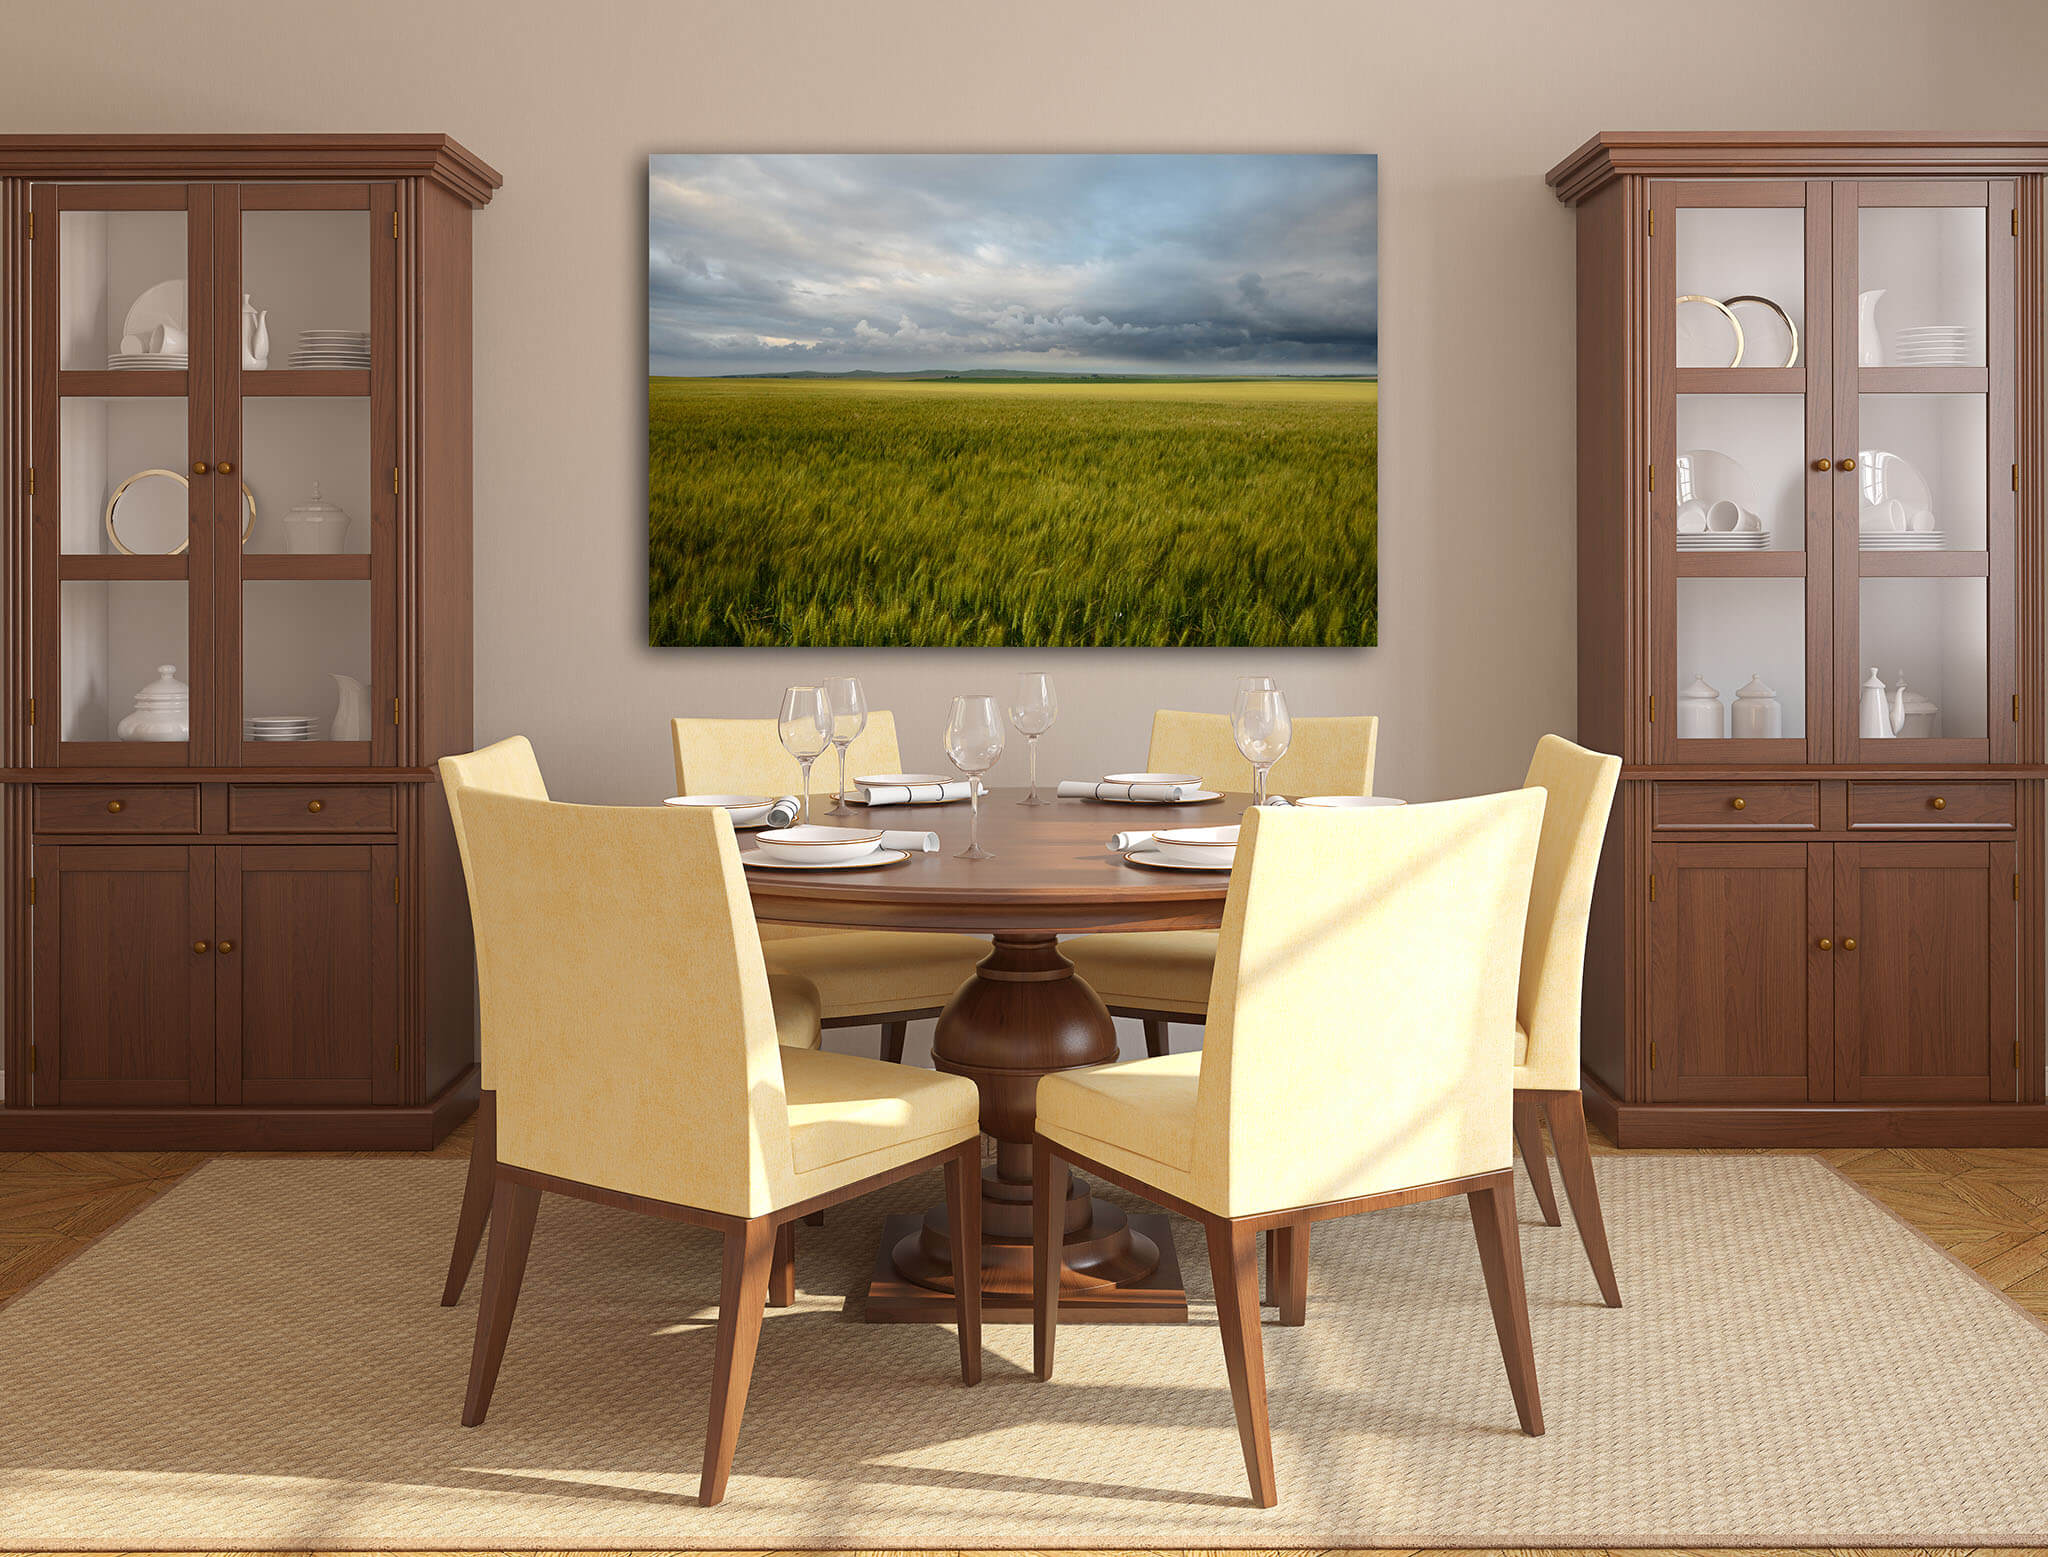 Height To Hang Art In Dining Room